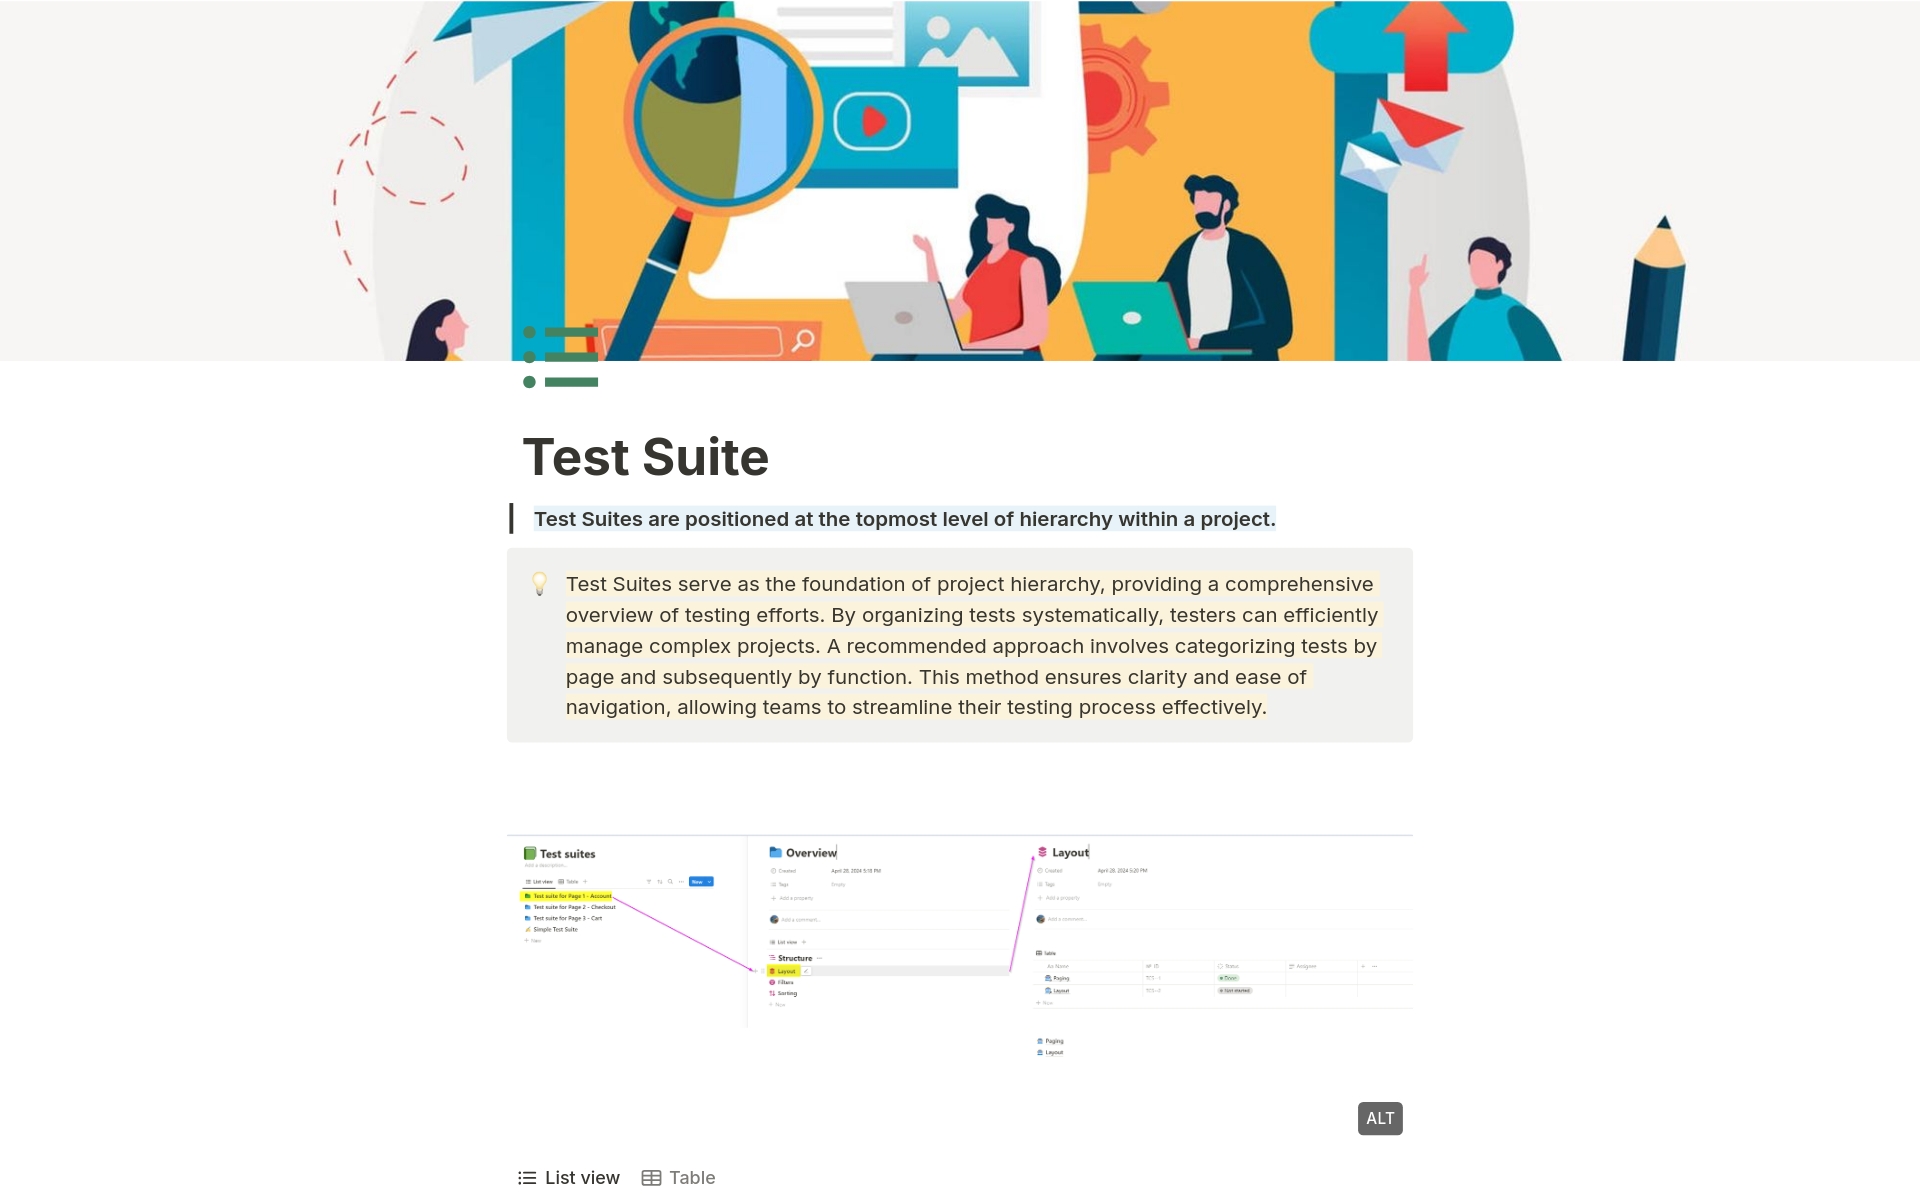 Optimize your testing process with our intuitive Notion template for organized test suites, categorizing tests by page and function for streamlined workflow.
